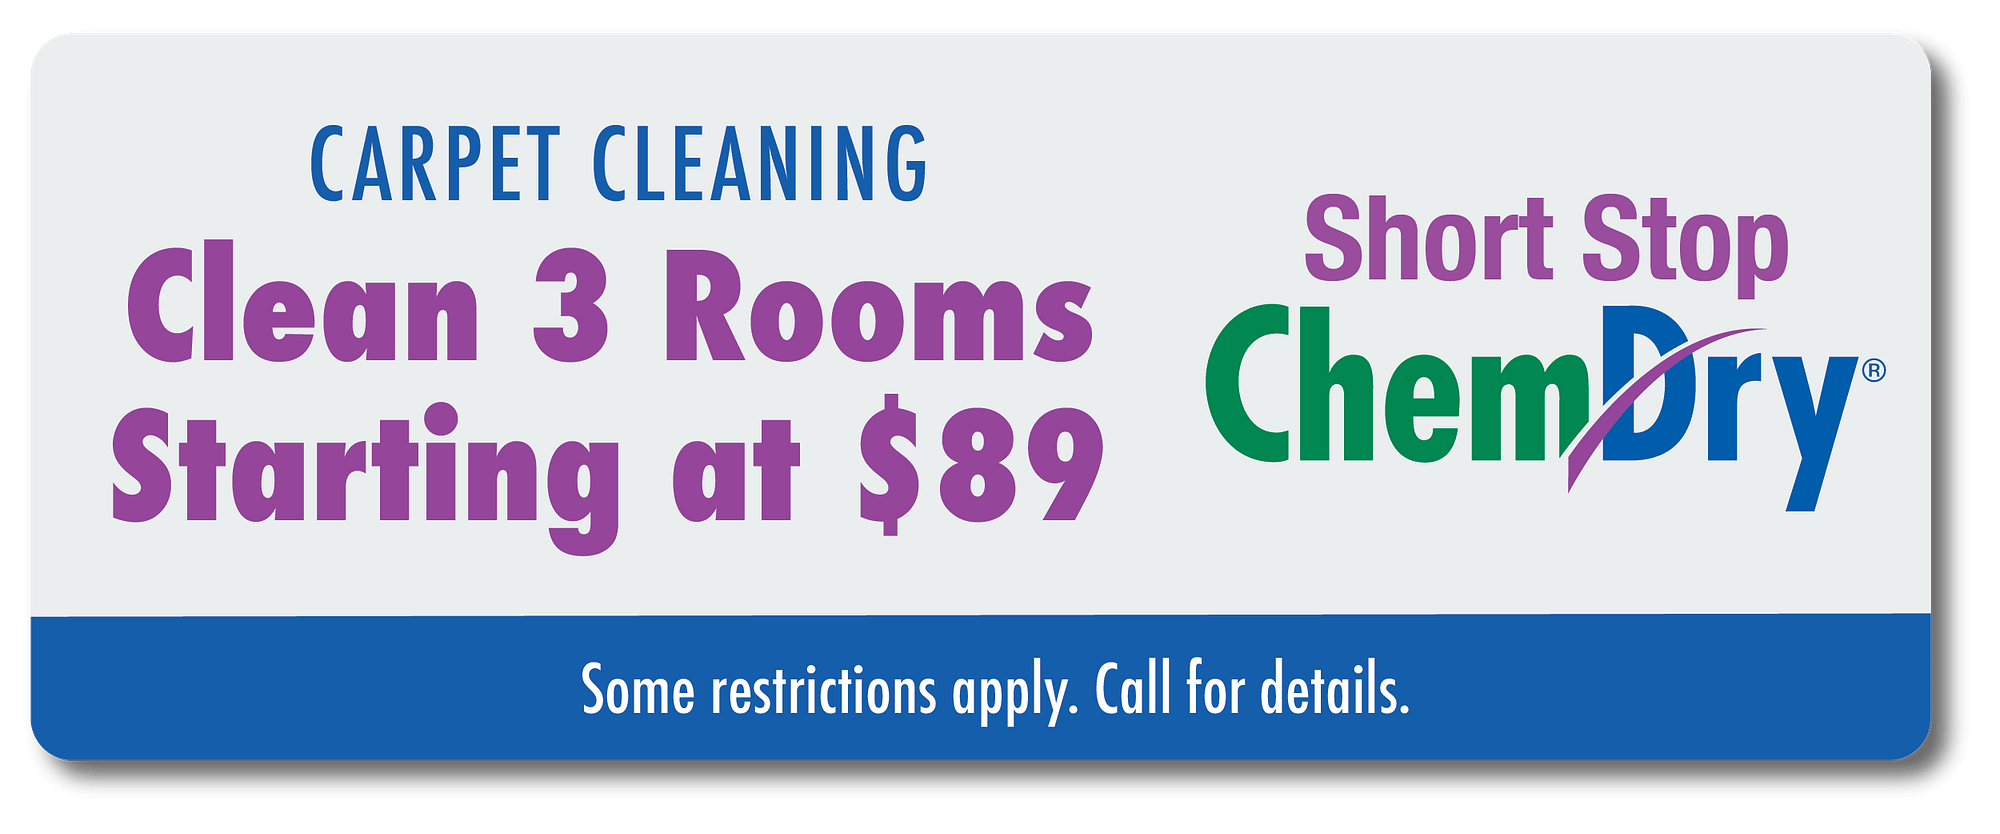 clean 3 rooms starting at $89 coupon